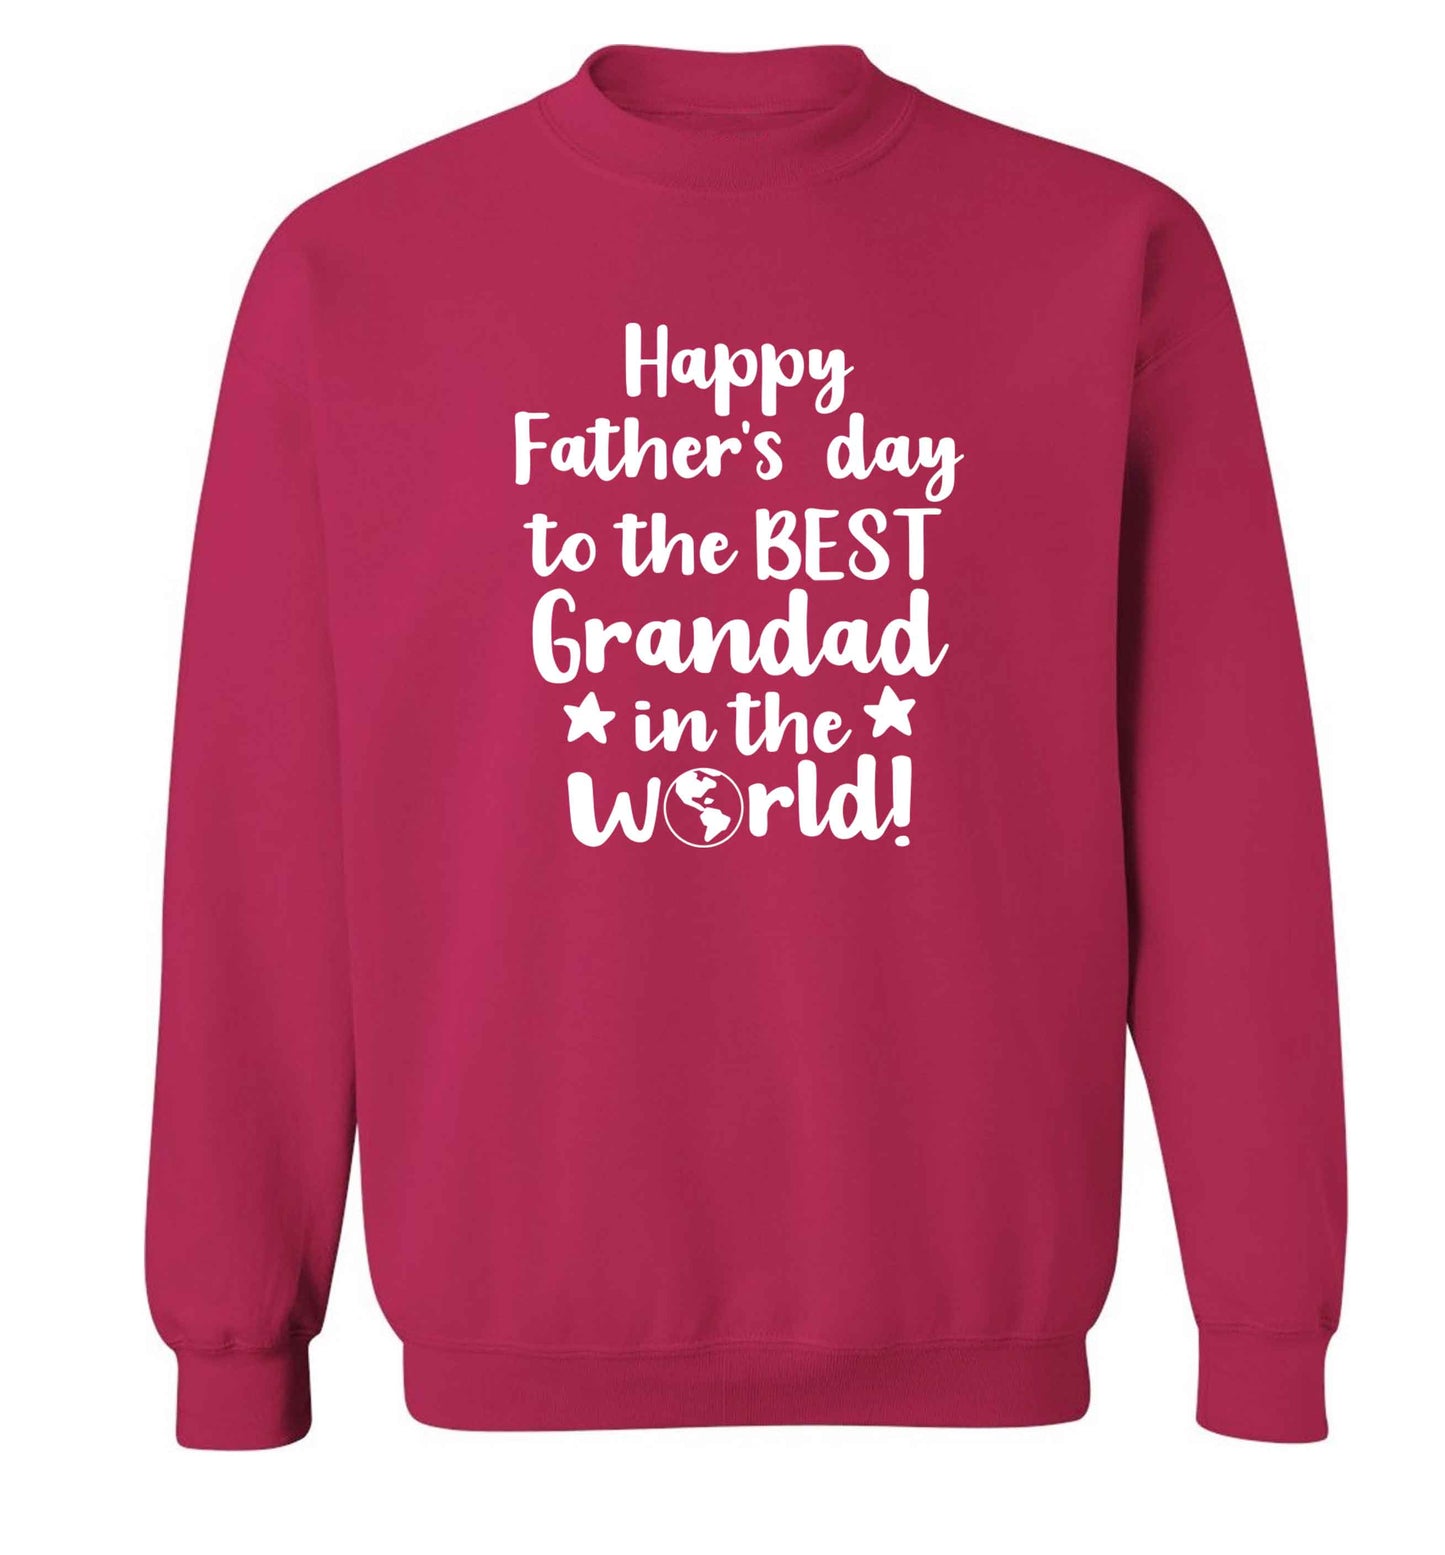 Happy Father's day to the best grandad in the world adult's unisex pink sweater 2XL